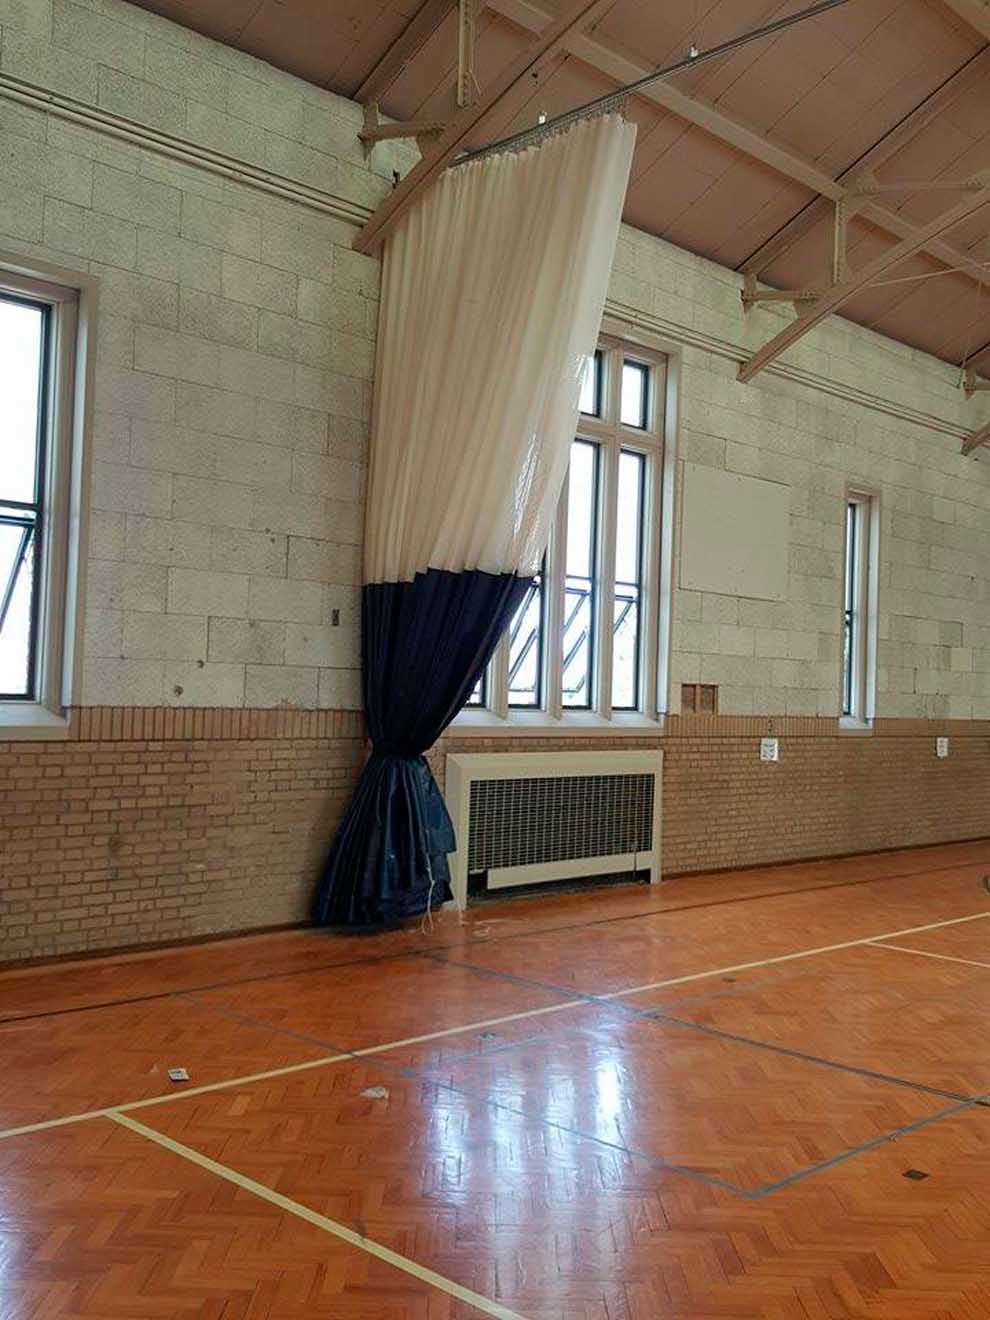 large curtain on track for basketball court